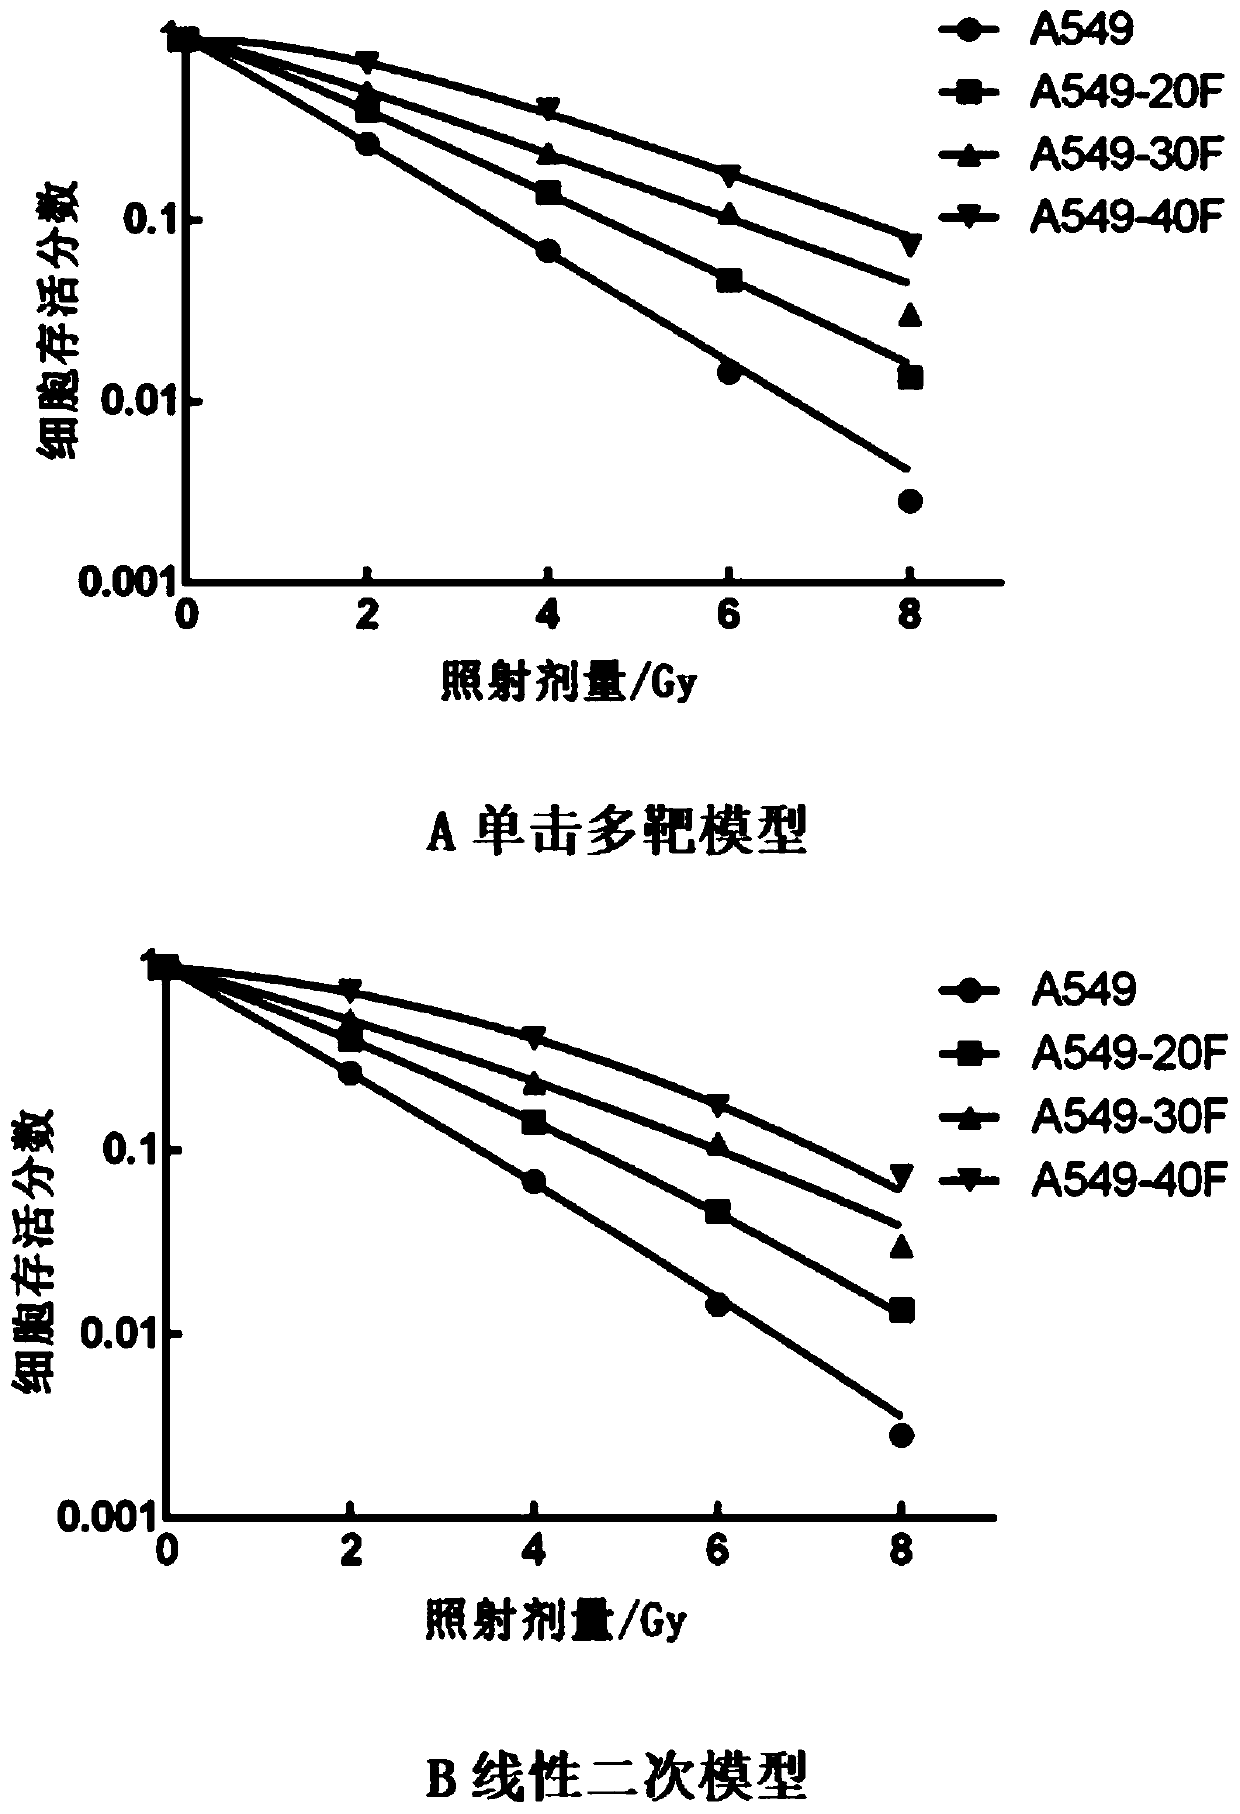 Equal-difference dose gradient radiation lung cancer surviving or resisting cell model as well as construction and application